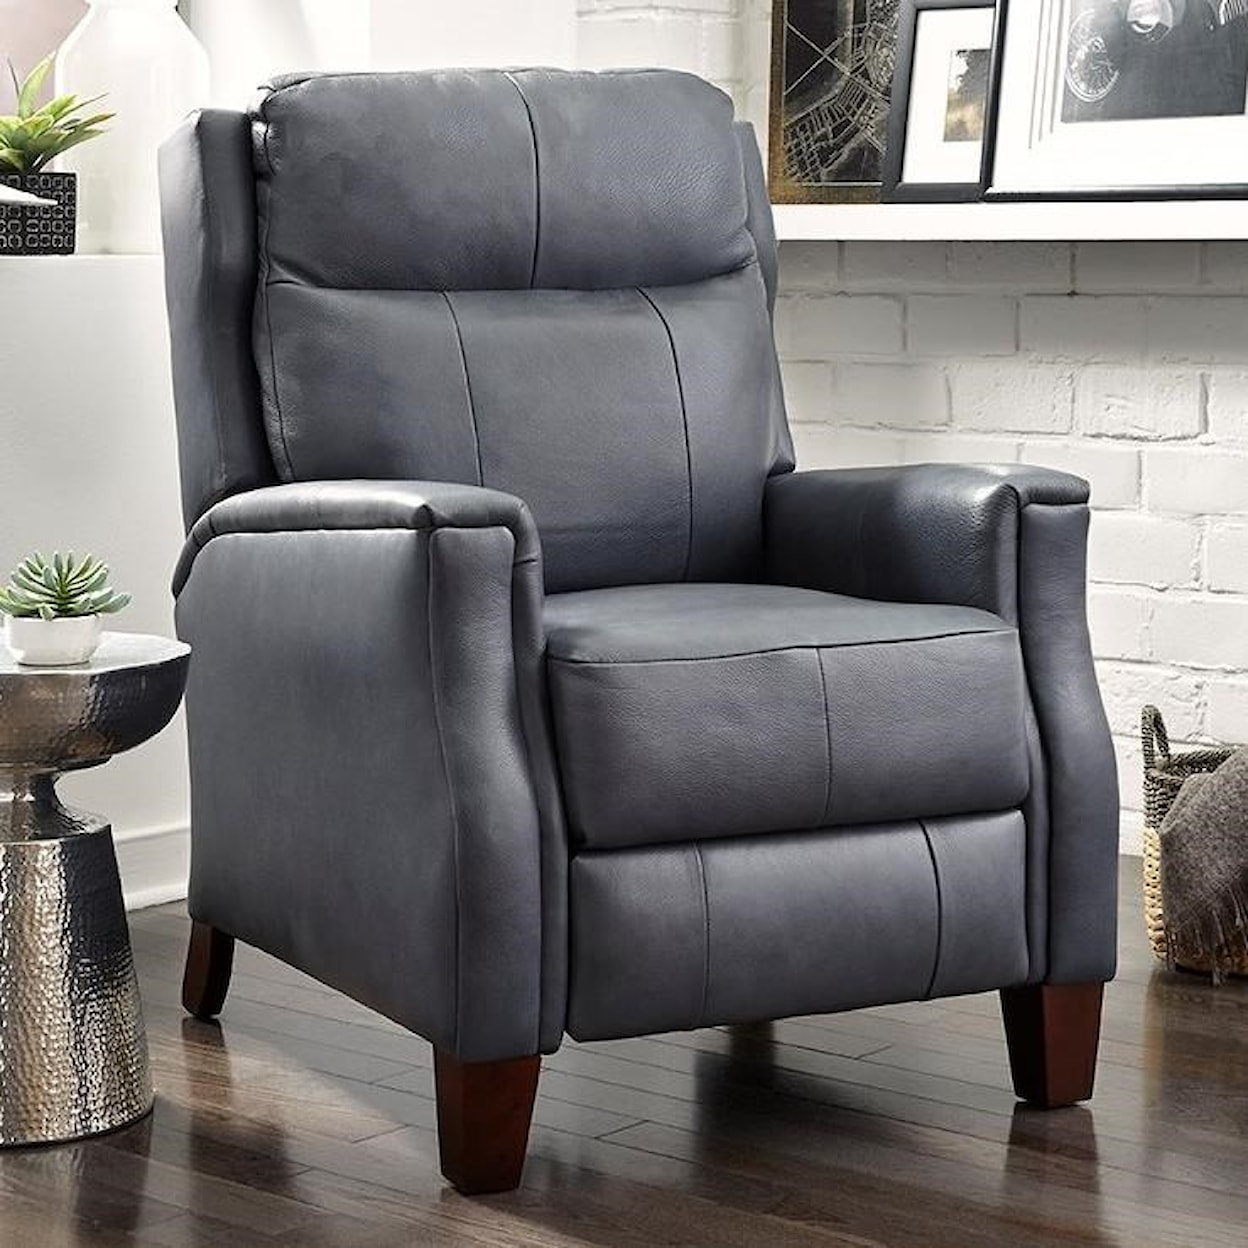 Southern Motion Bowie Power High Leg Recliner